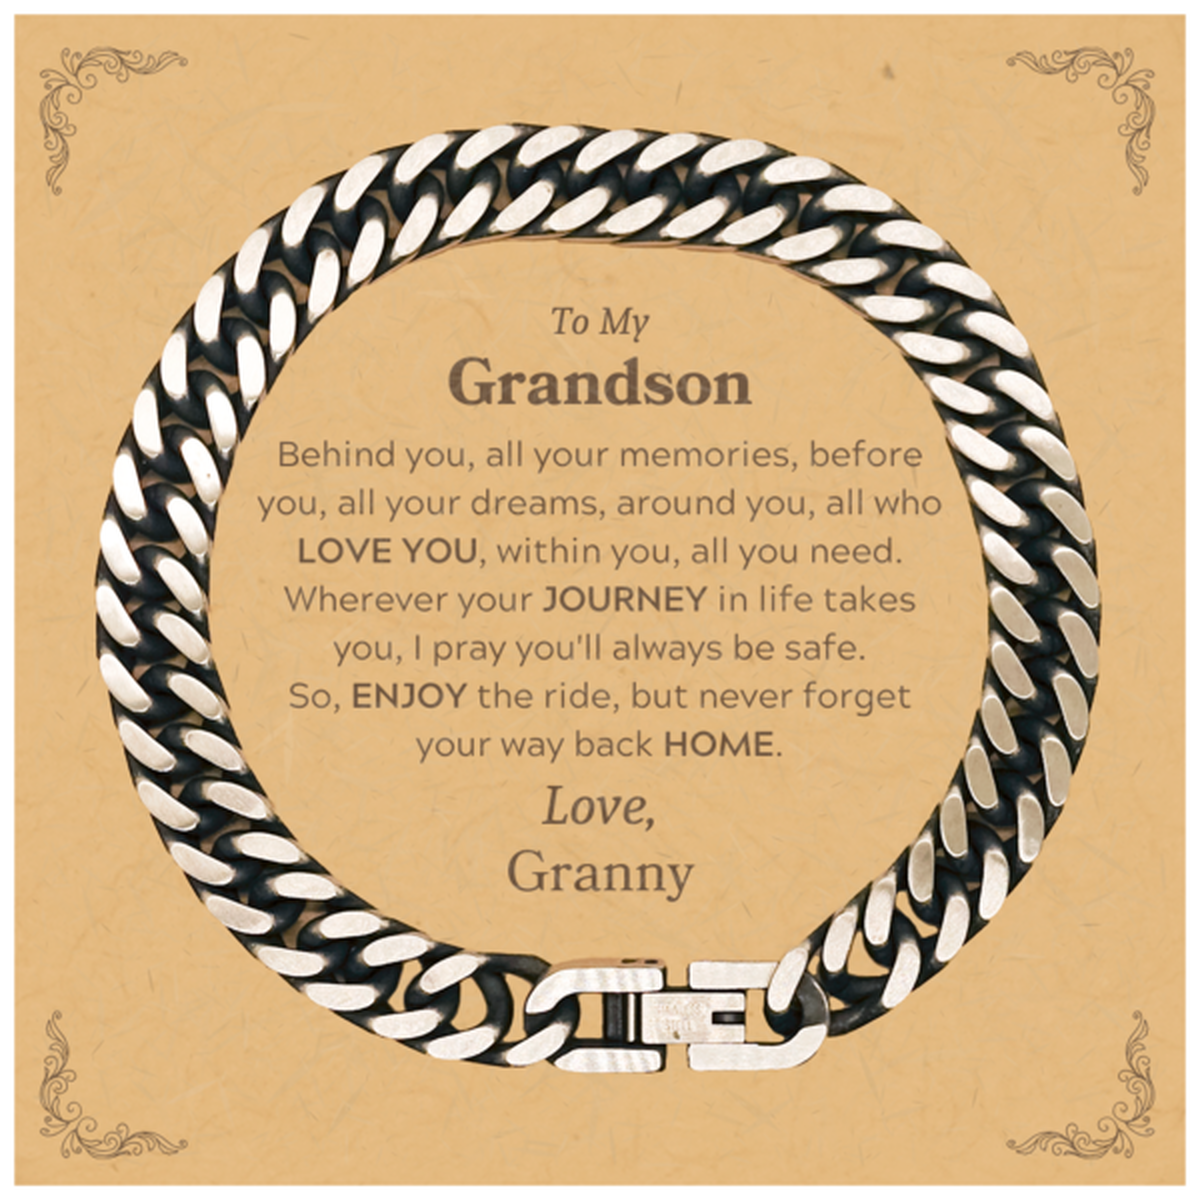 To My Grandson Graduation Gifts from Granny, Grandson Cuban Link Chain Bracelet Christmas Birthday Gifts for Grandson Behind you, all your memories, before you, all your dreams. Love, Granny